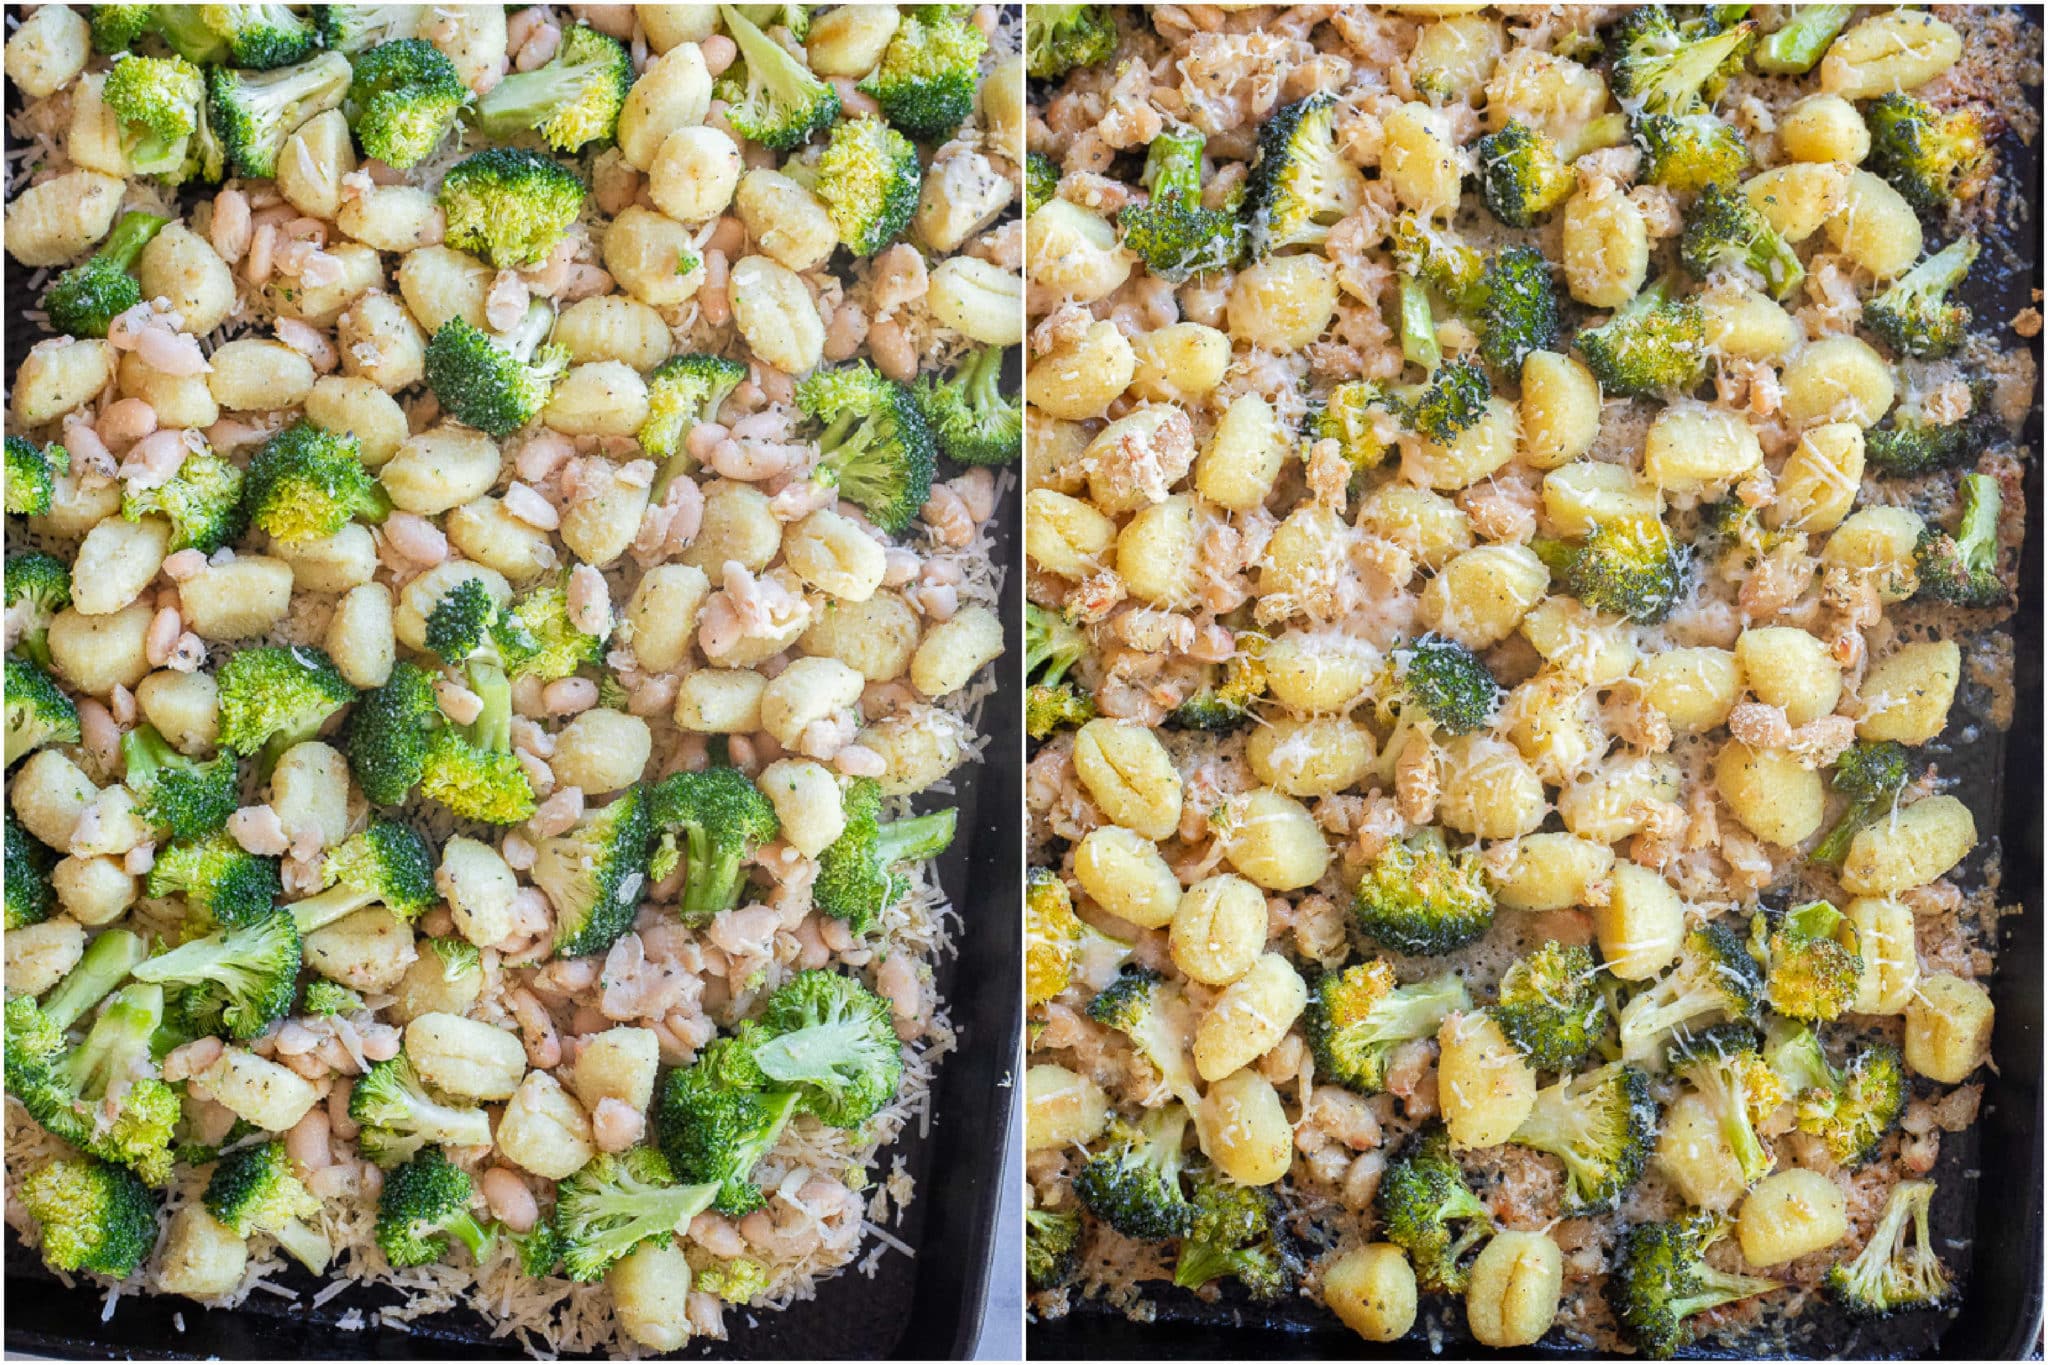 parmesan crusted gnocchi and broccoli before and after it has been baked in the oven.